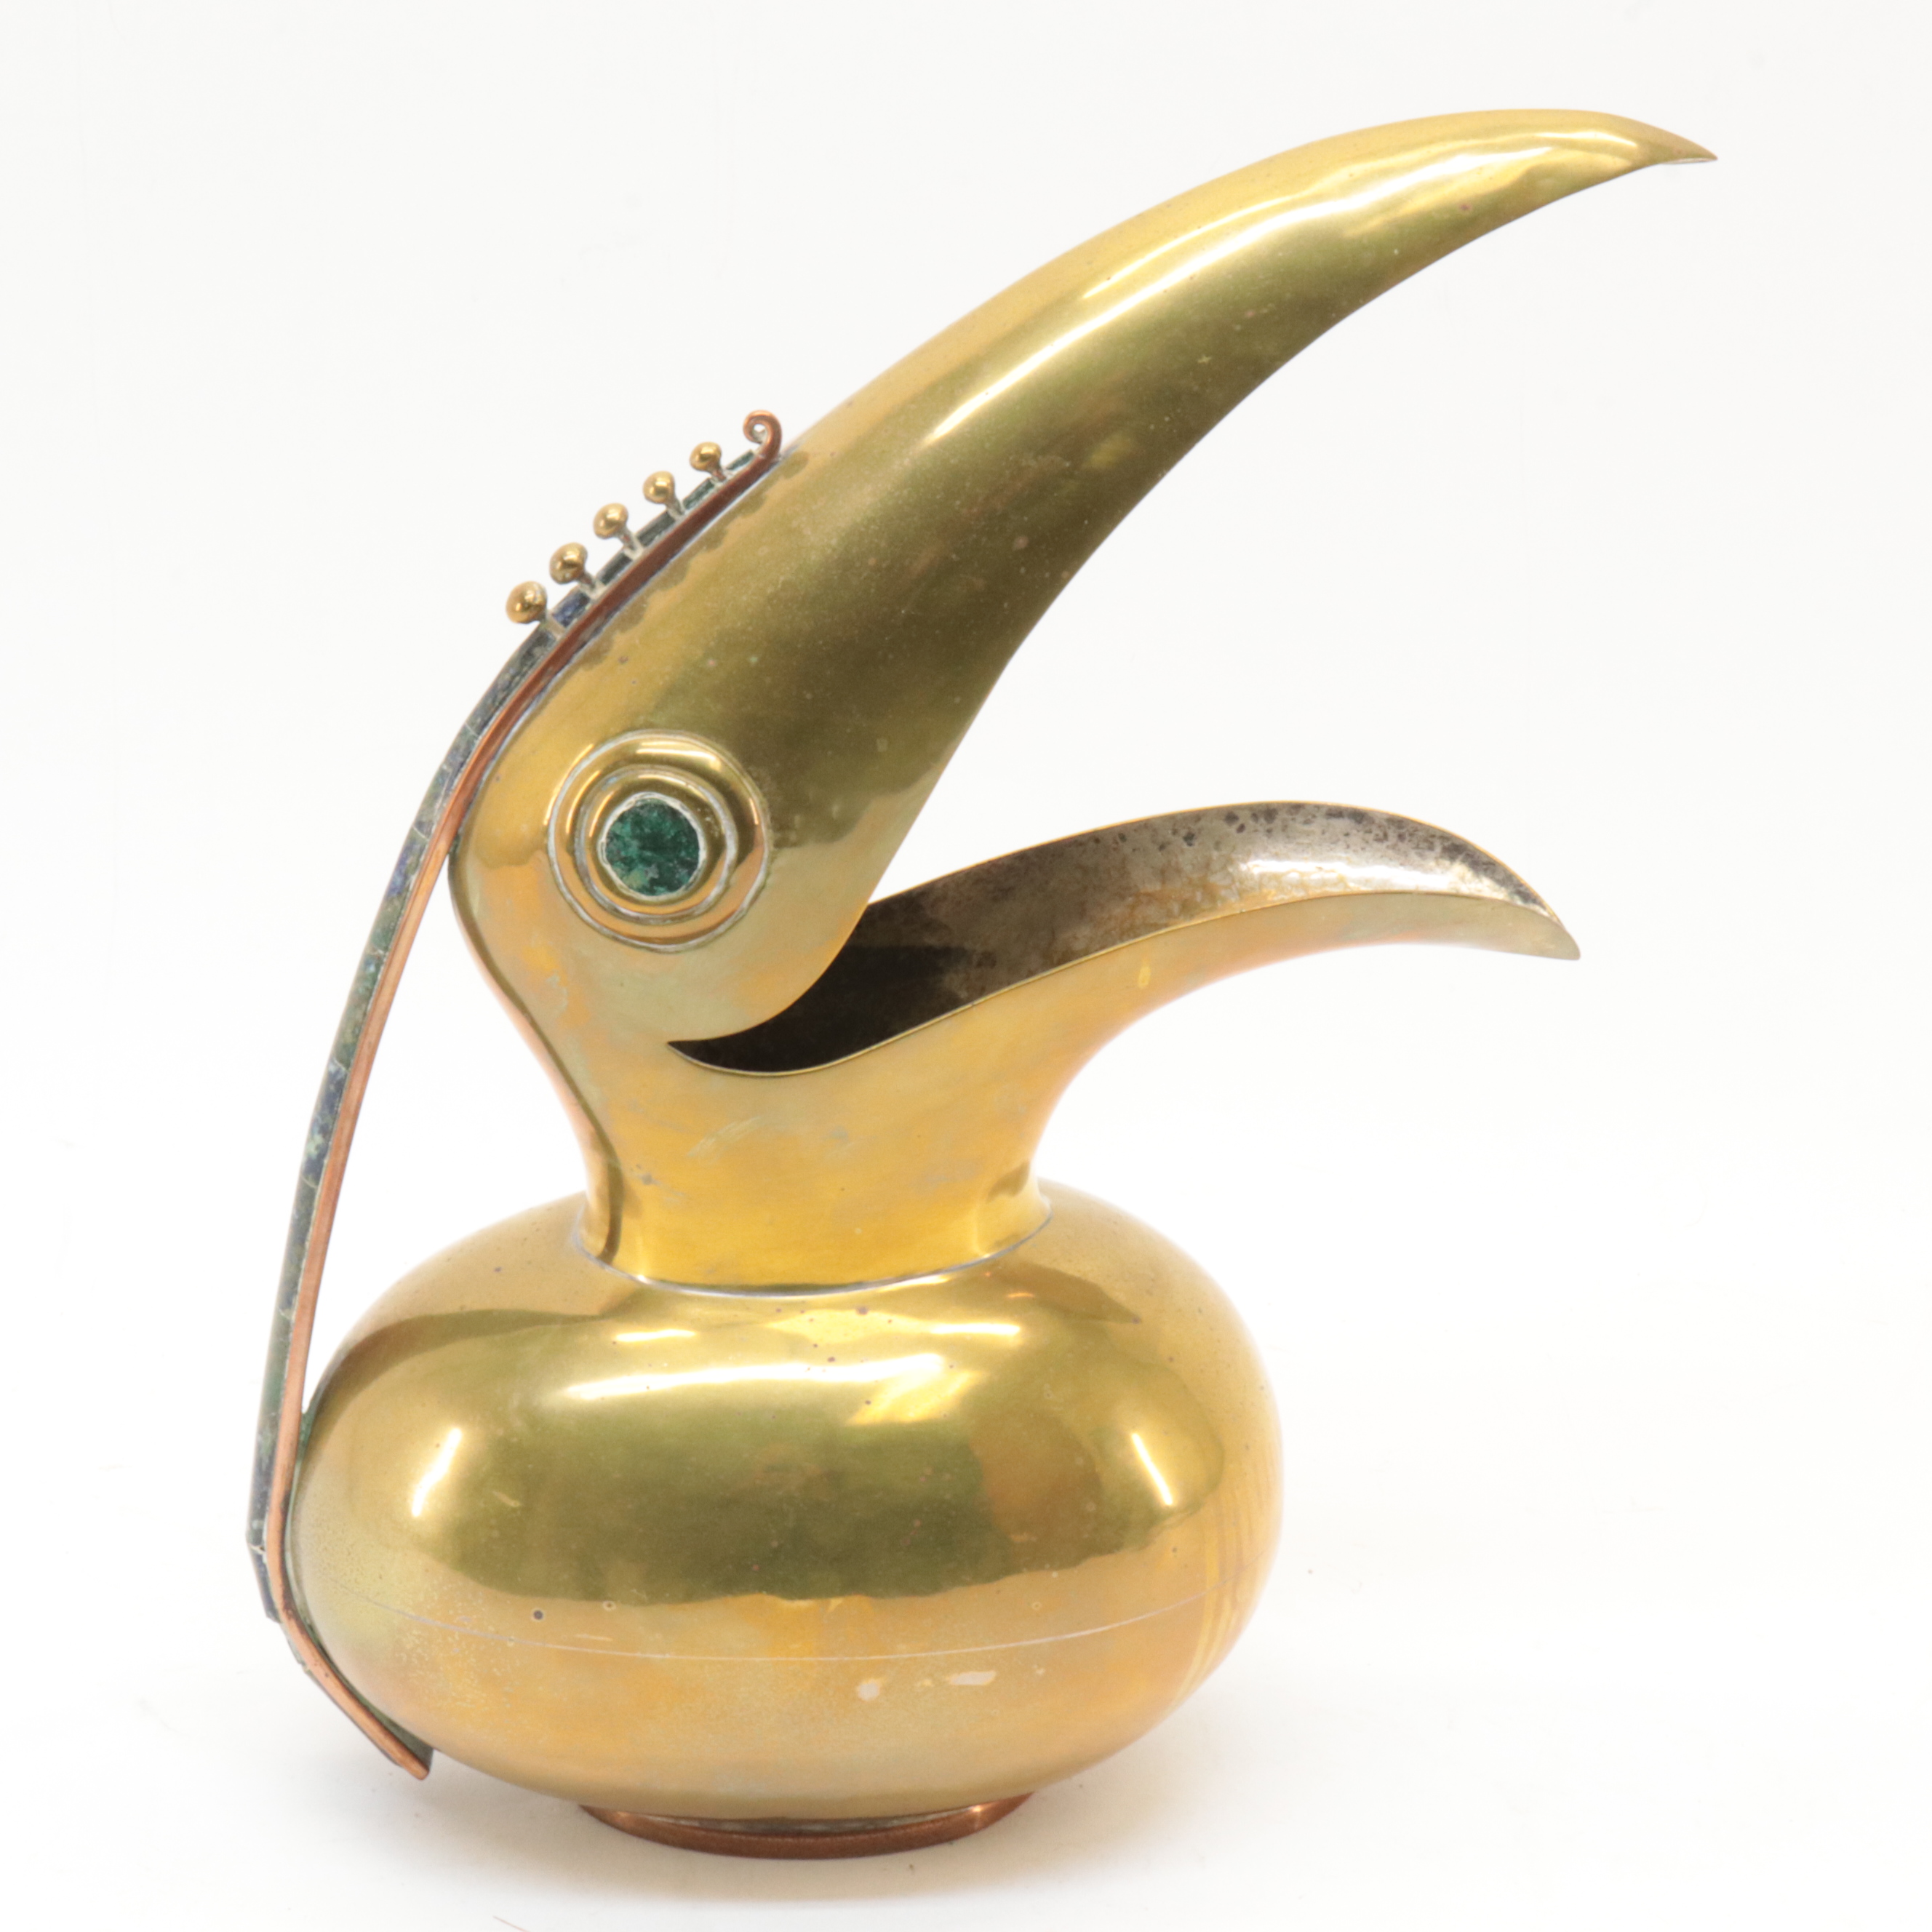 Los Castillo Taxco Mixed Metals With Brass Toucan Form Pitcher With Malachite Inlay.500.800